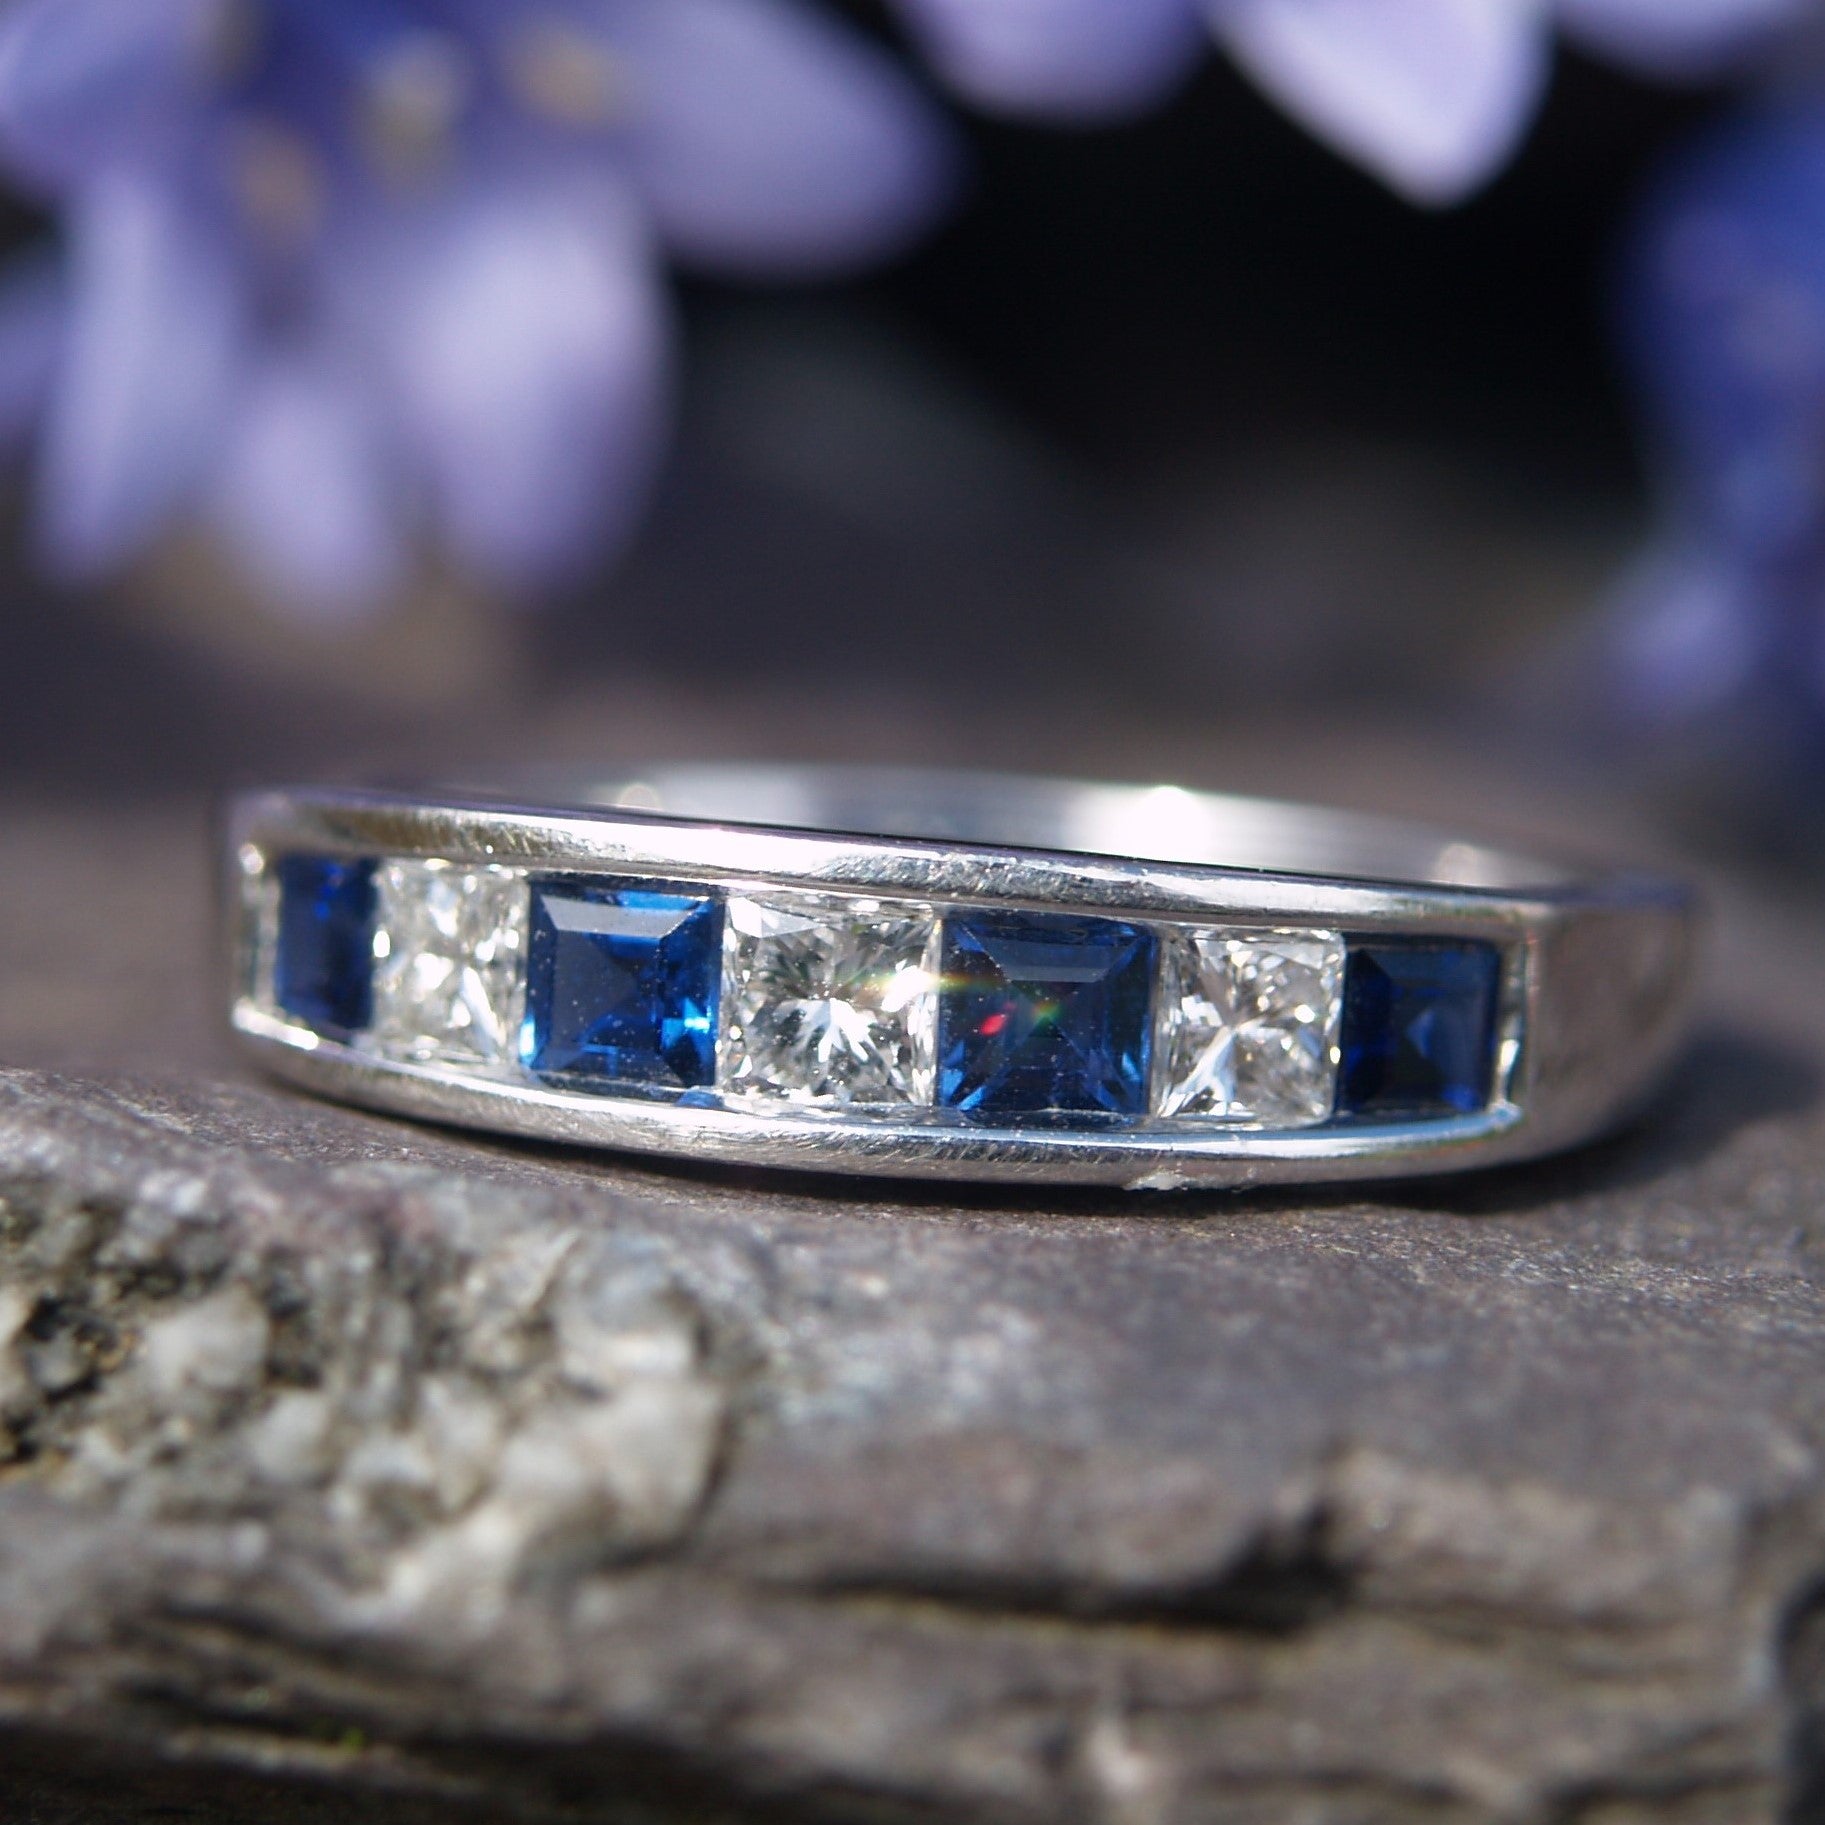 14ct White Gold Sapphire & Diamond Eternity Ring Size M 1/2 or 6 1/4 US.